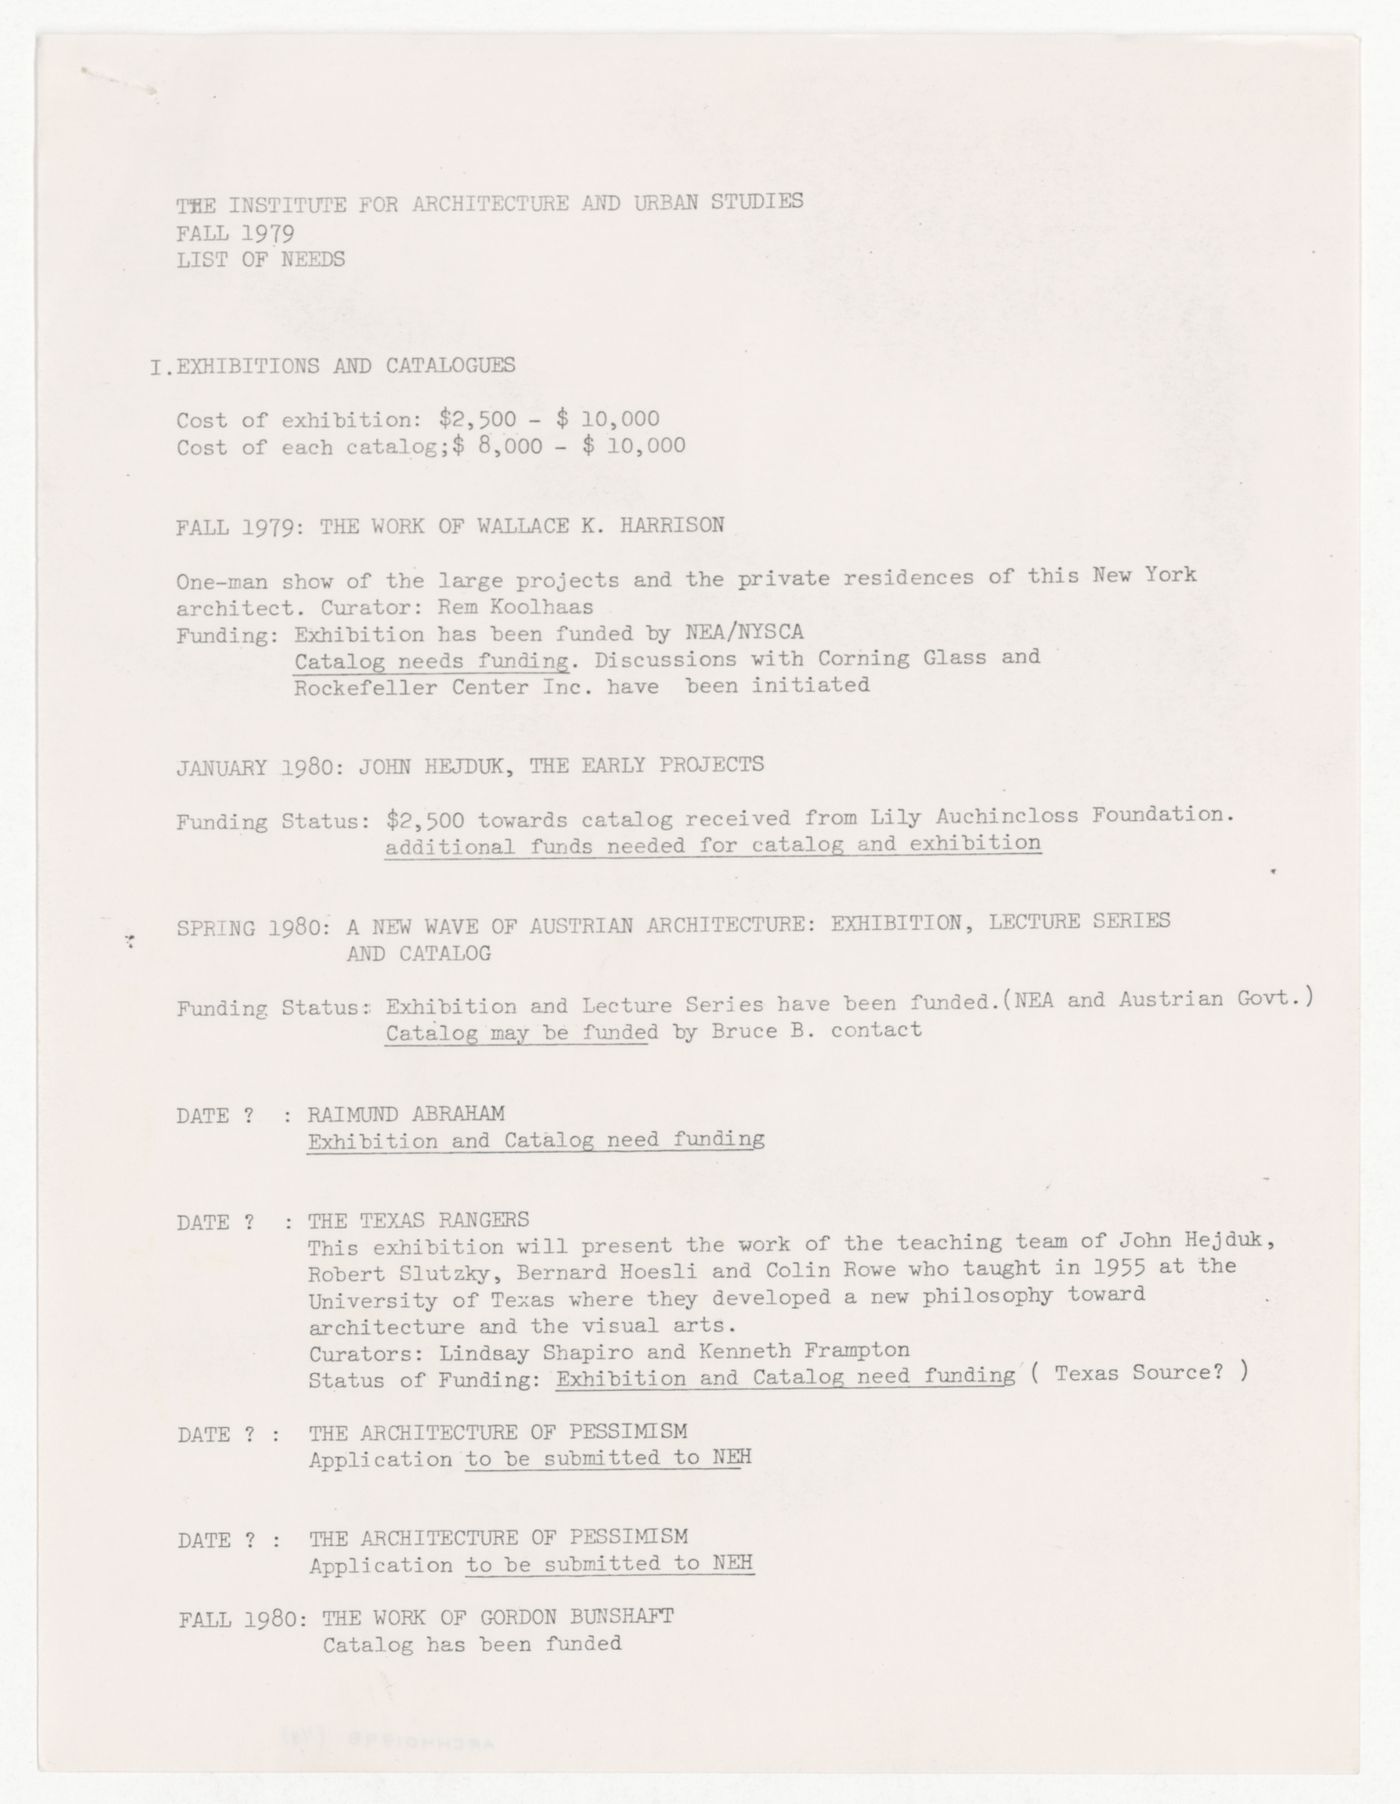 List of needs for fall 1979